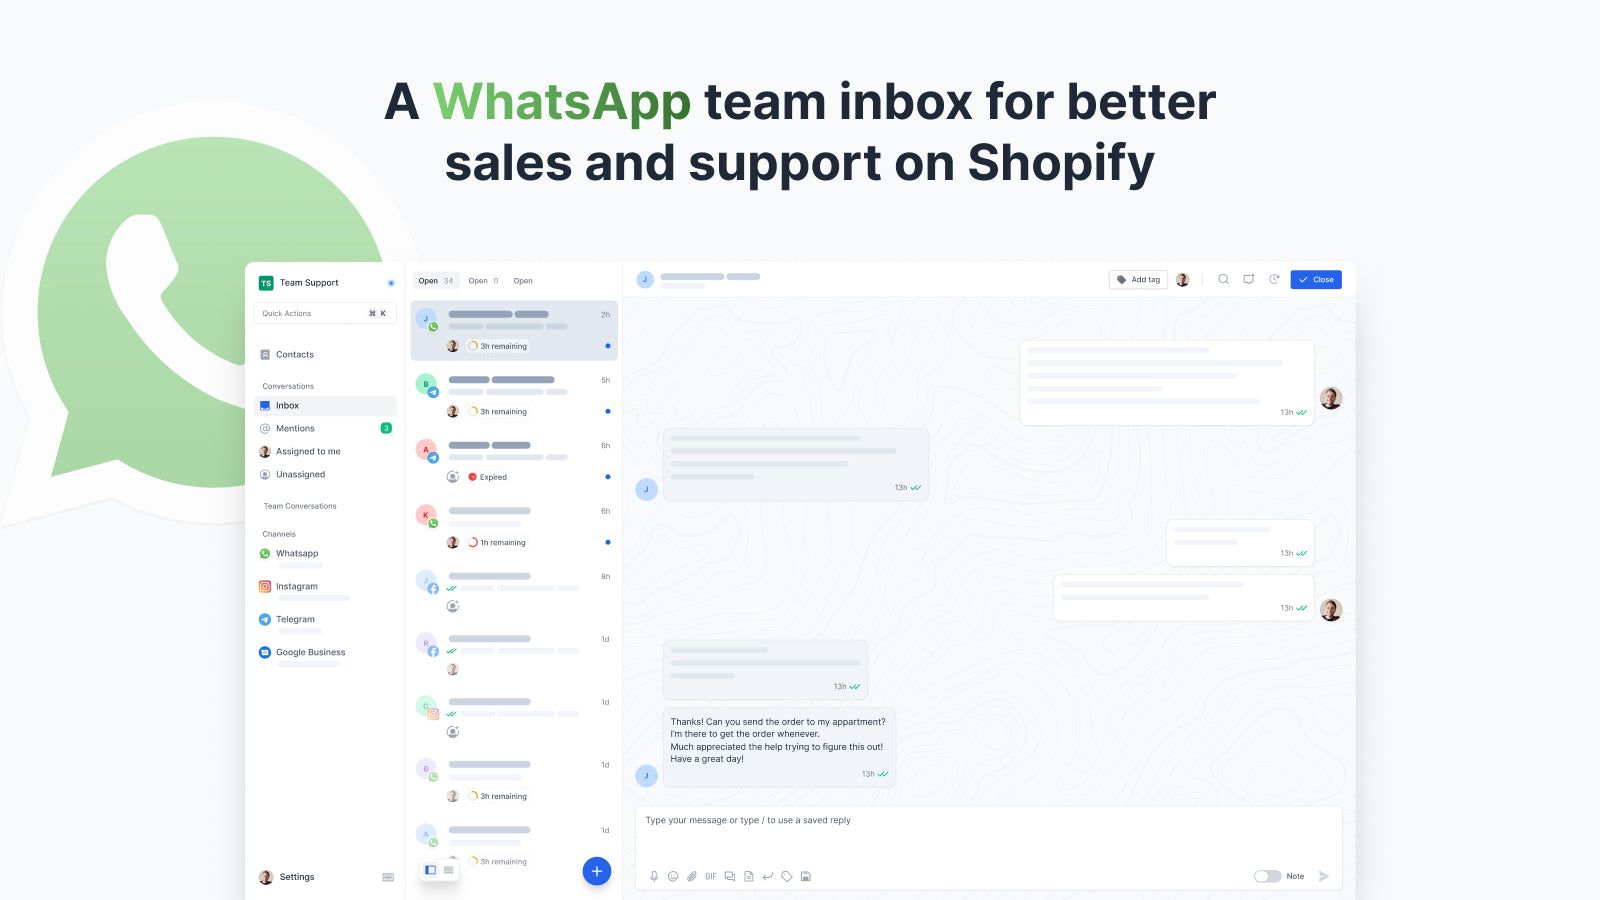 A WhatsApp team inbox for better sales and support over Shopify